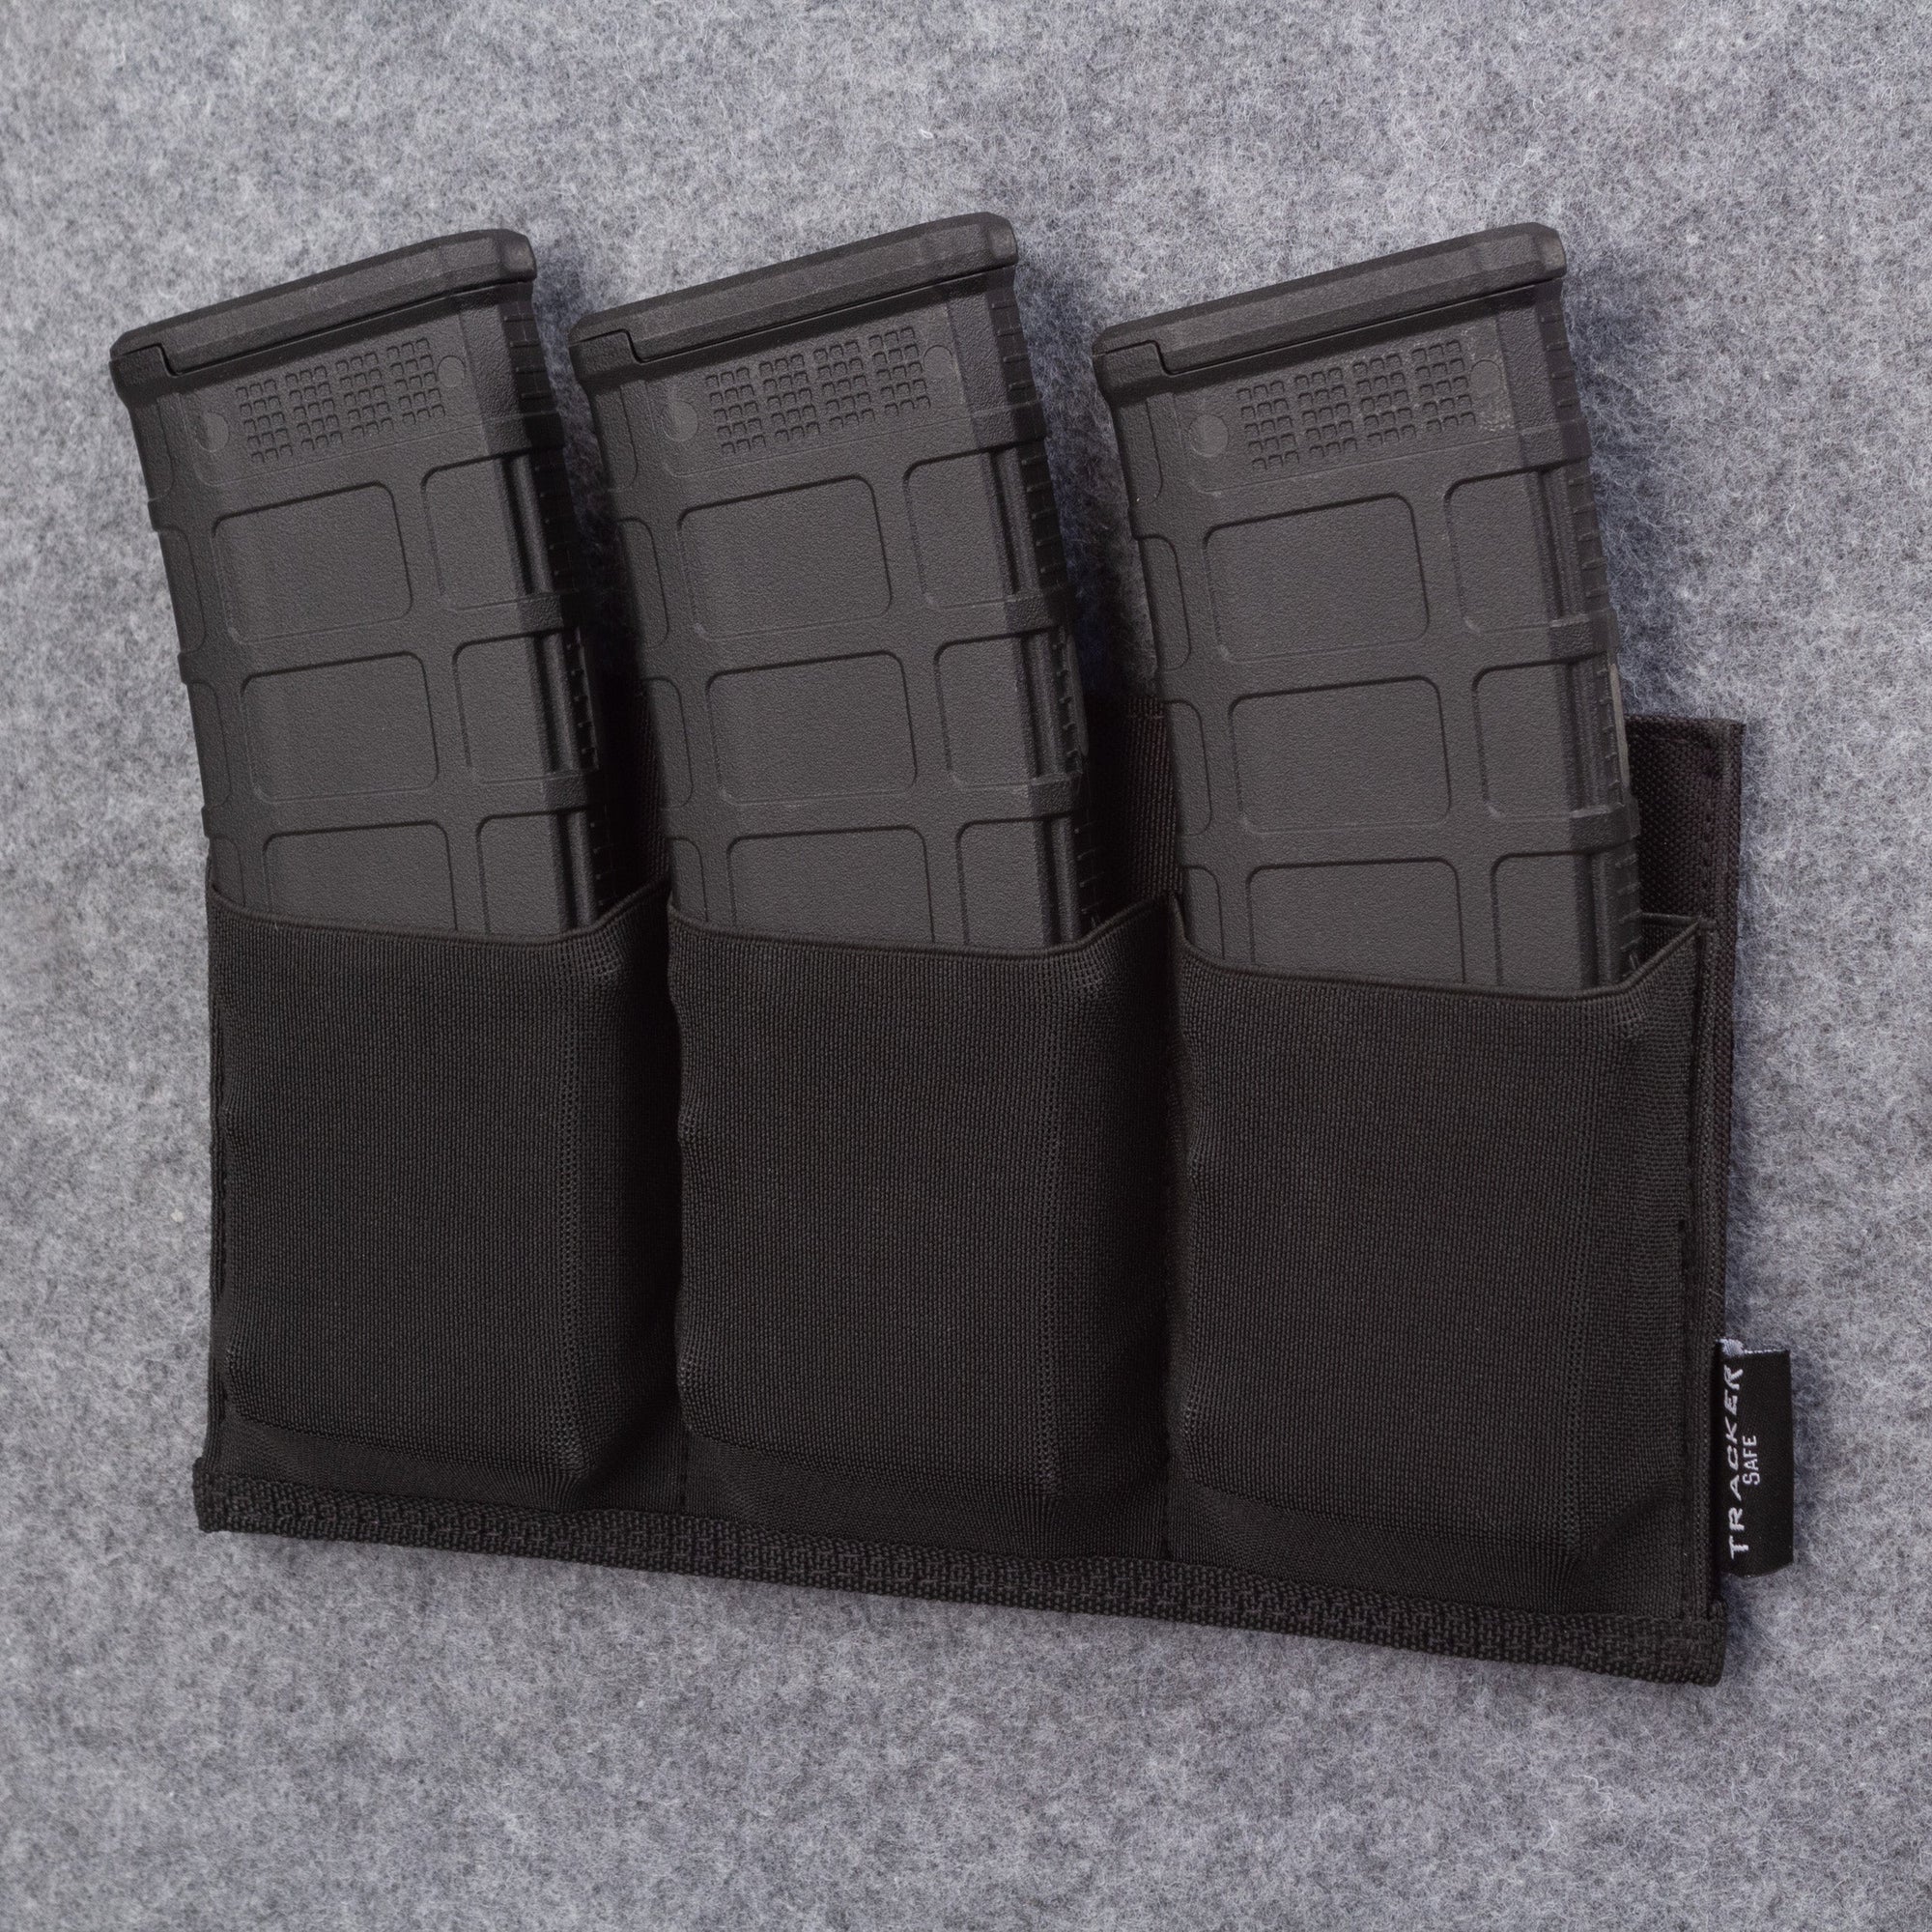 Tracker PE3 Pocket Elastic 3 Mag Holder with Mags